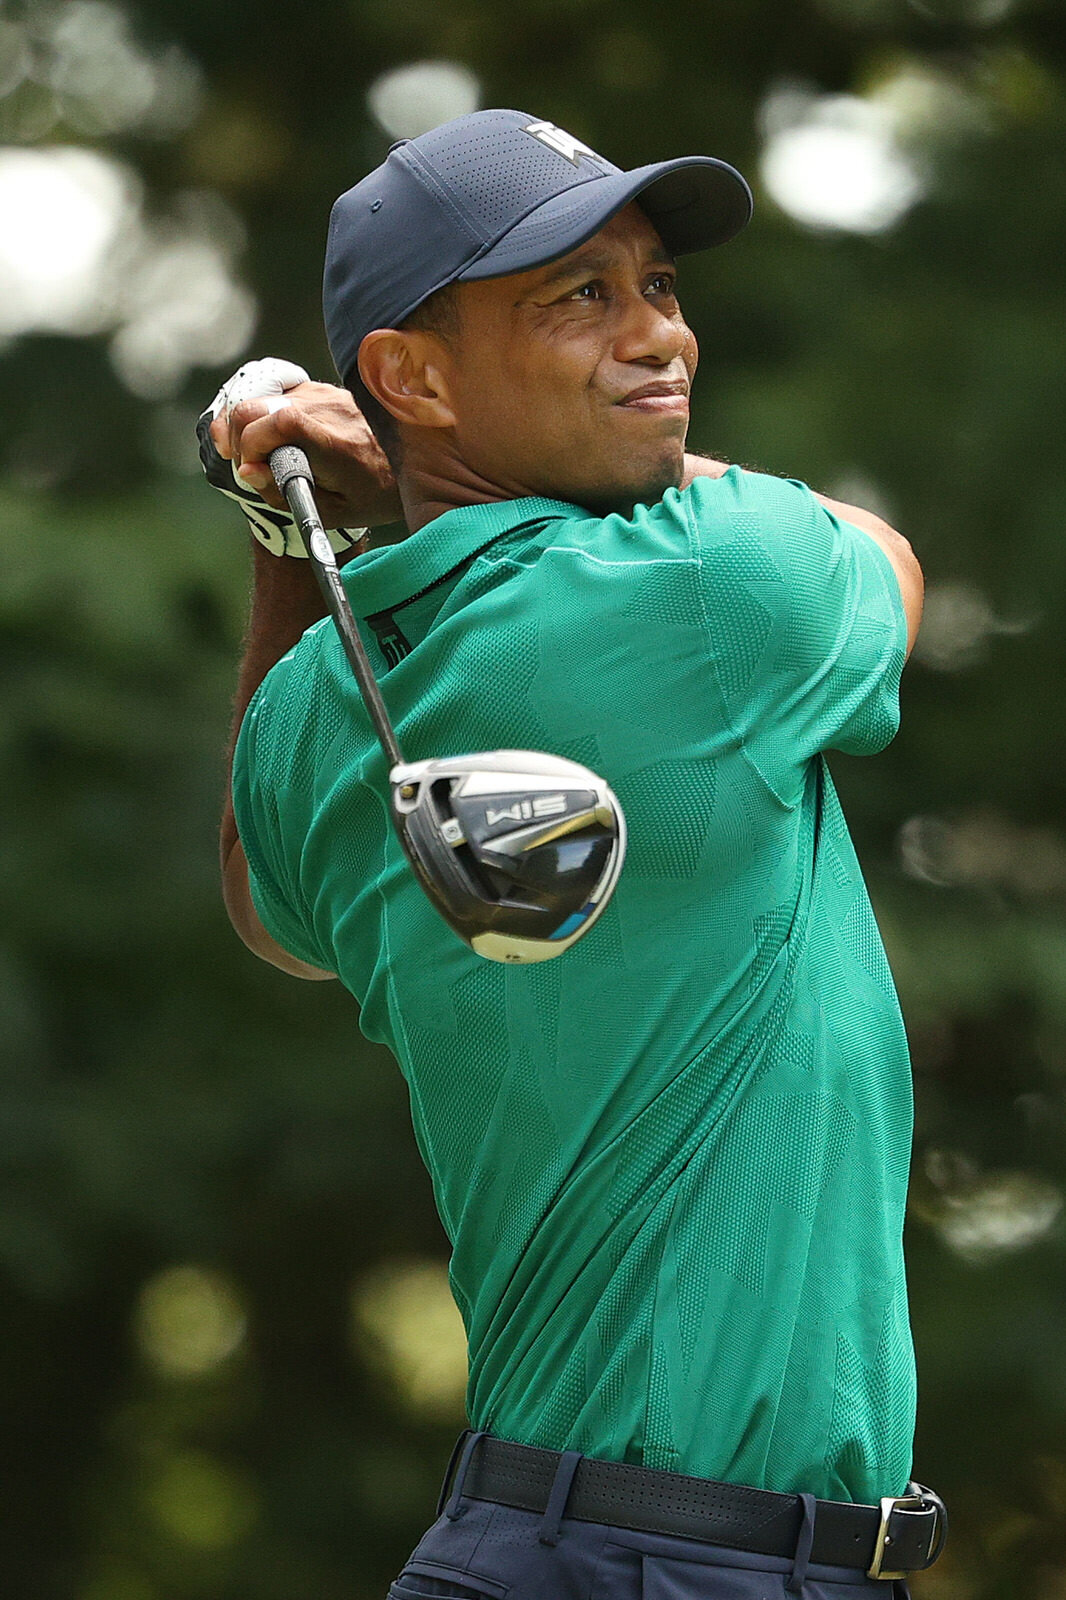  NORTON, MASSACHUSETTS - AUGUST 21: Tiger Woods of the United States plays his shot from the ninth tee during the second round of The Northern Trust at TPC Boston on August 21, 2020 in Norton, Massachusetts. (Photo by Maddie Meyer/Getty Images) 